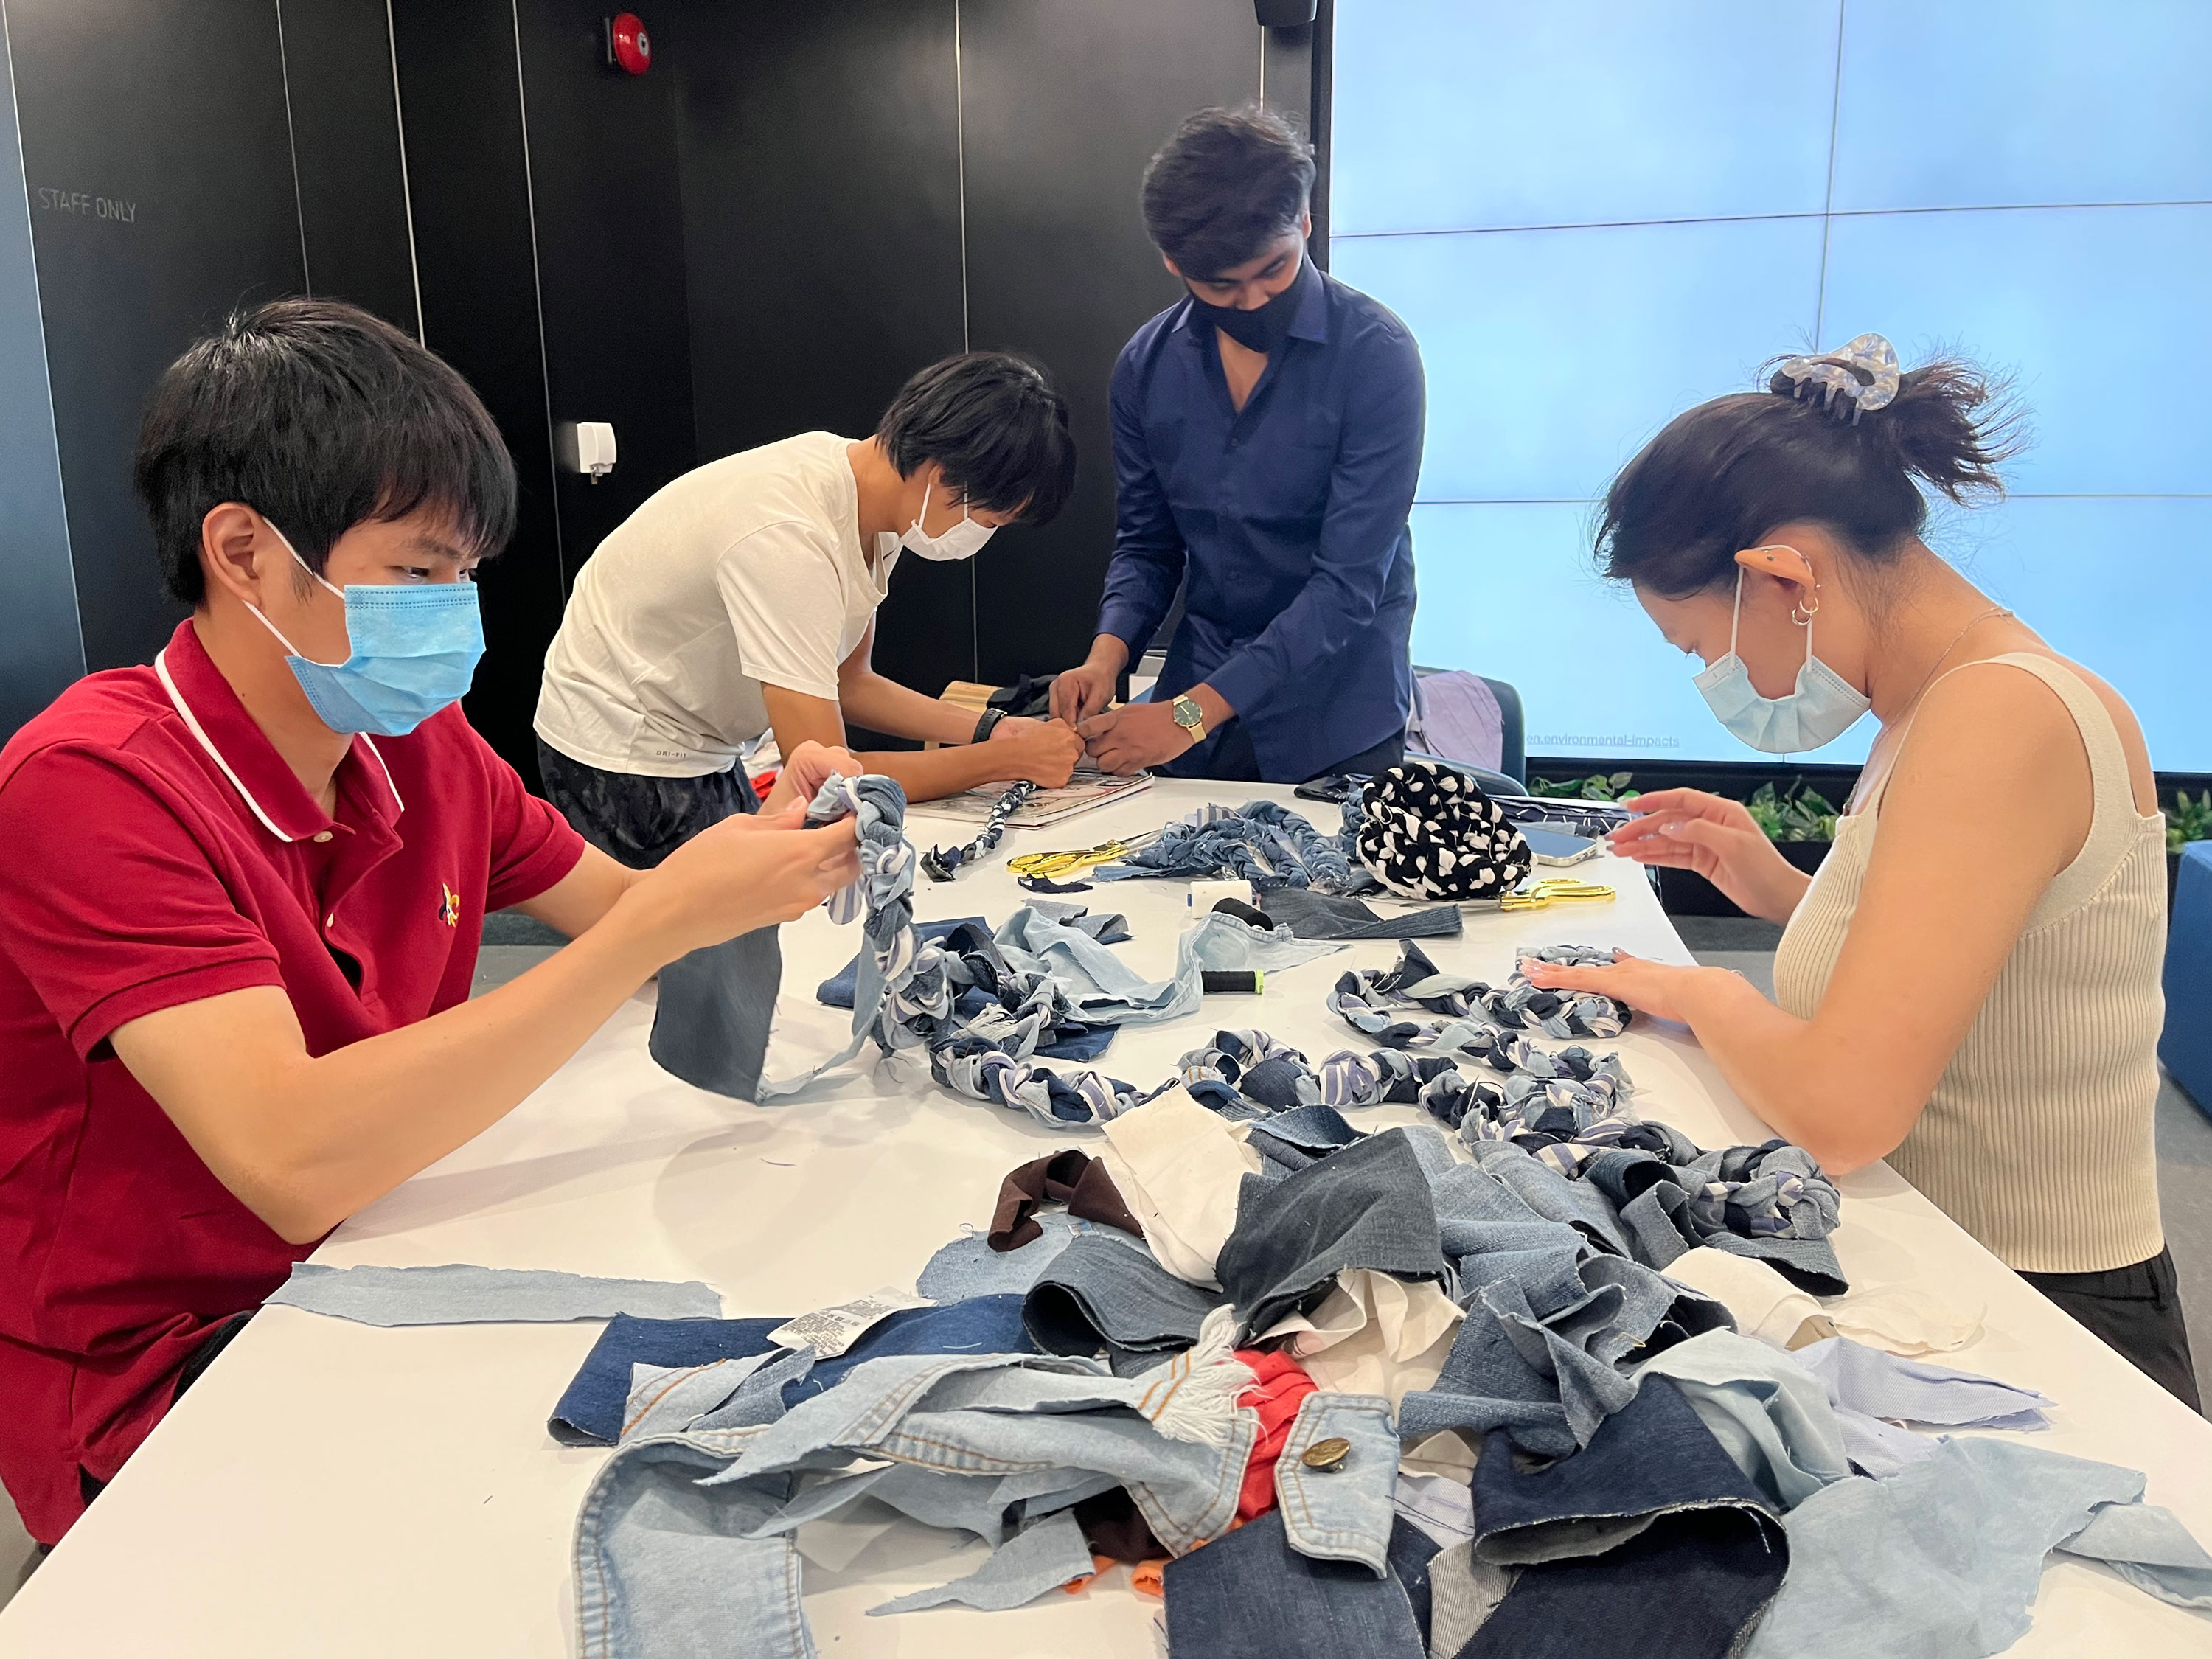 Participants of the workshop braiding cut denim strips in preparation to make a container